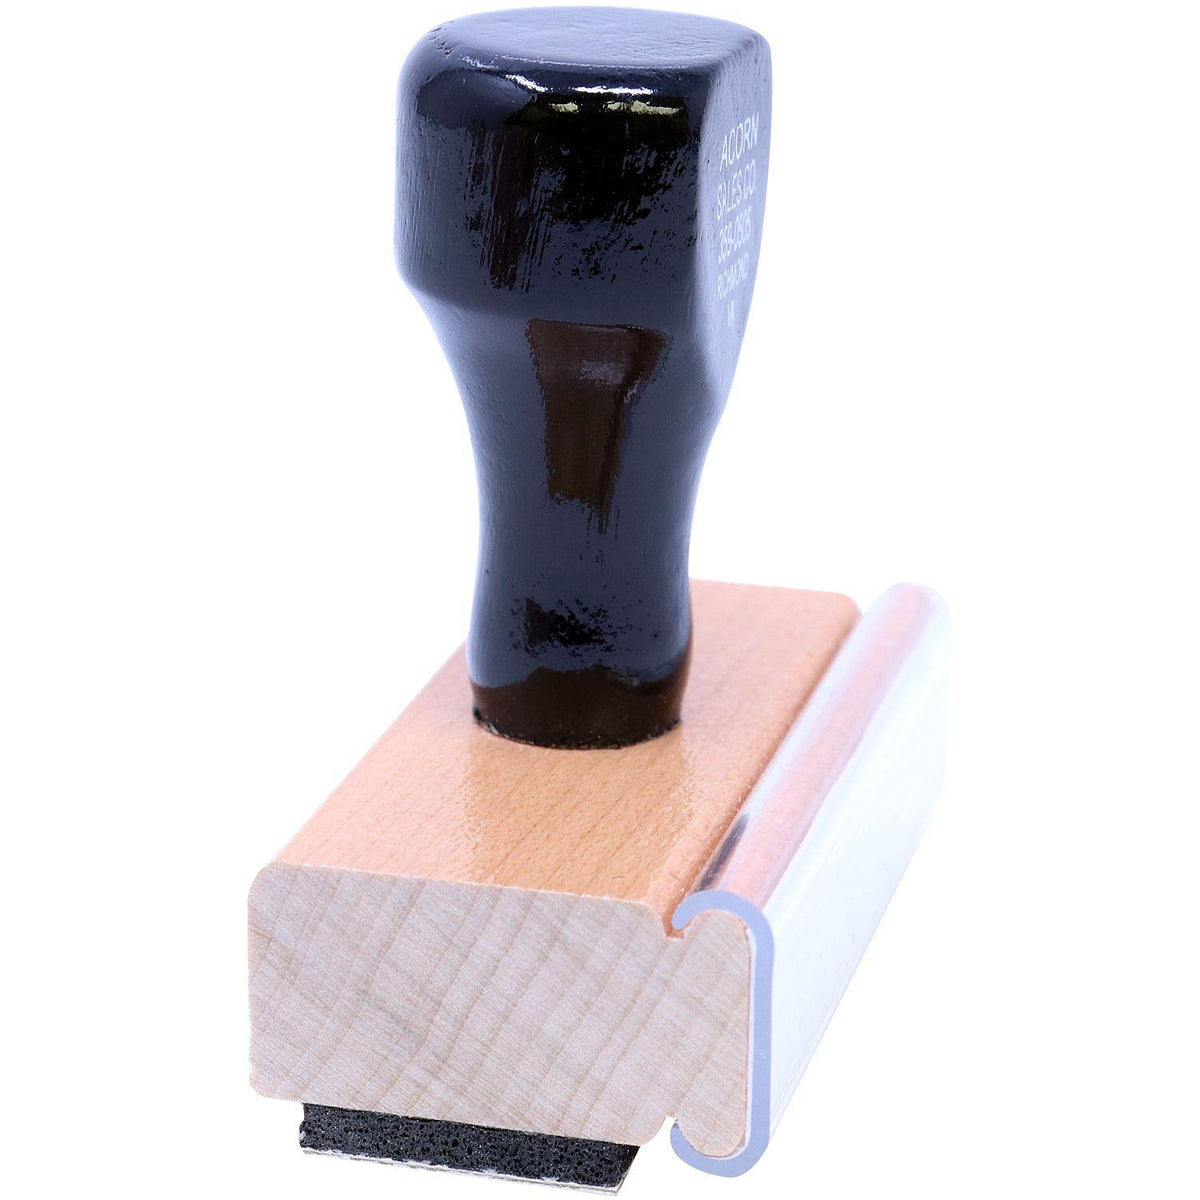 Side View of Large Dnr Rubber Stamp at an Angle